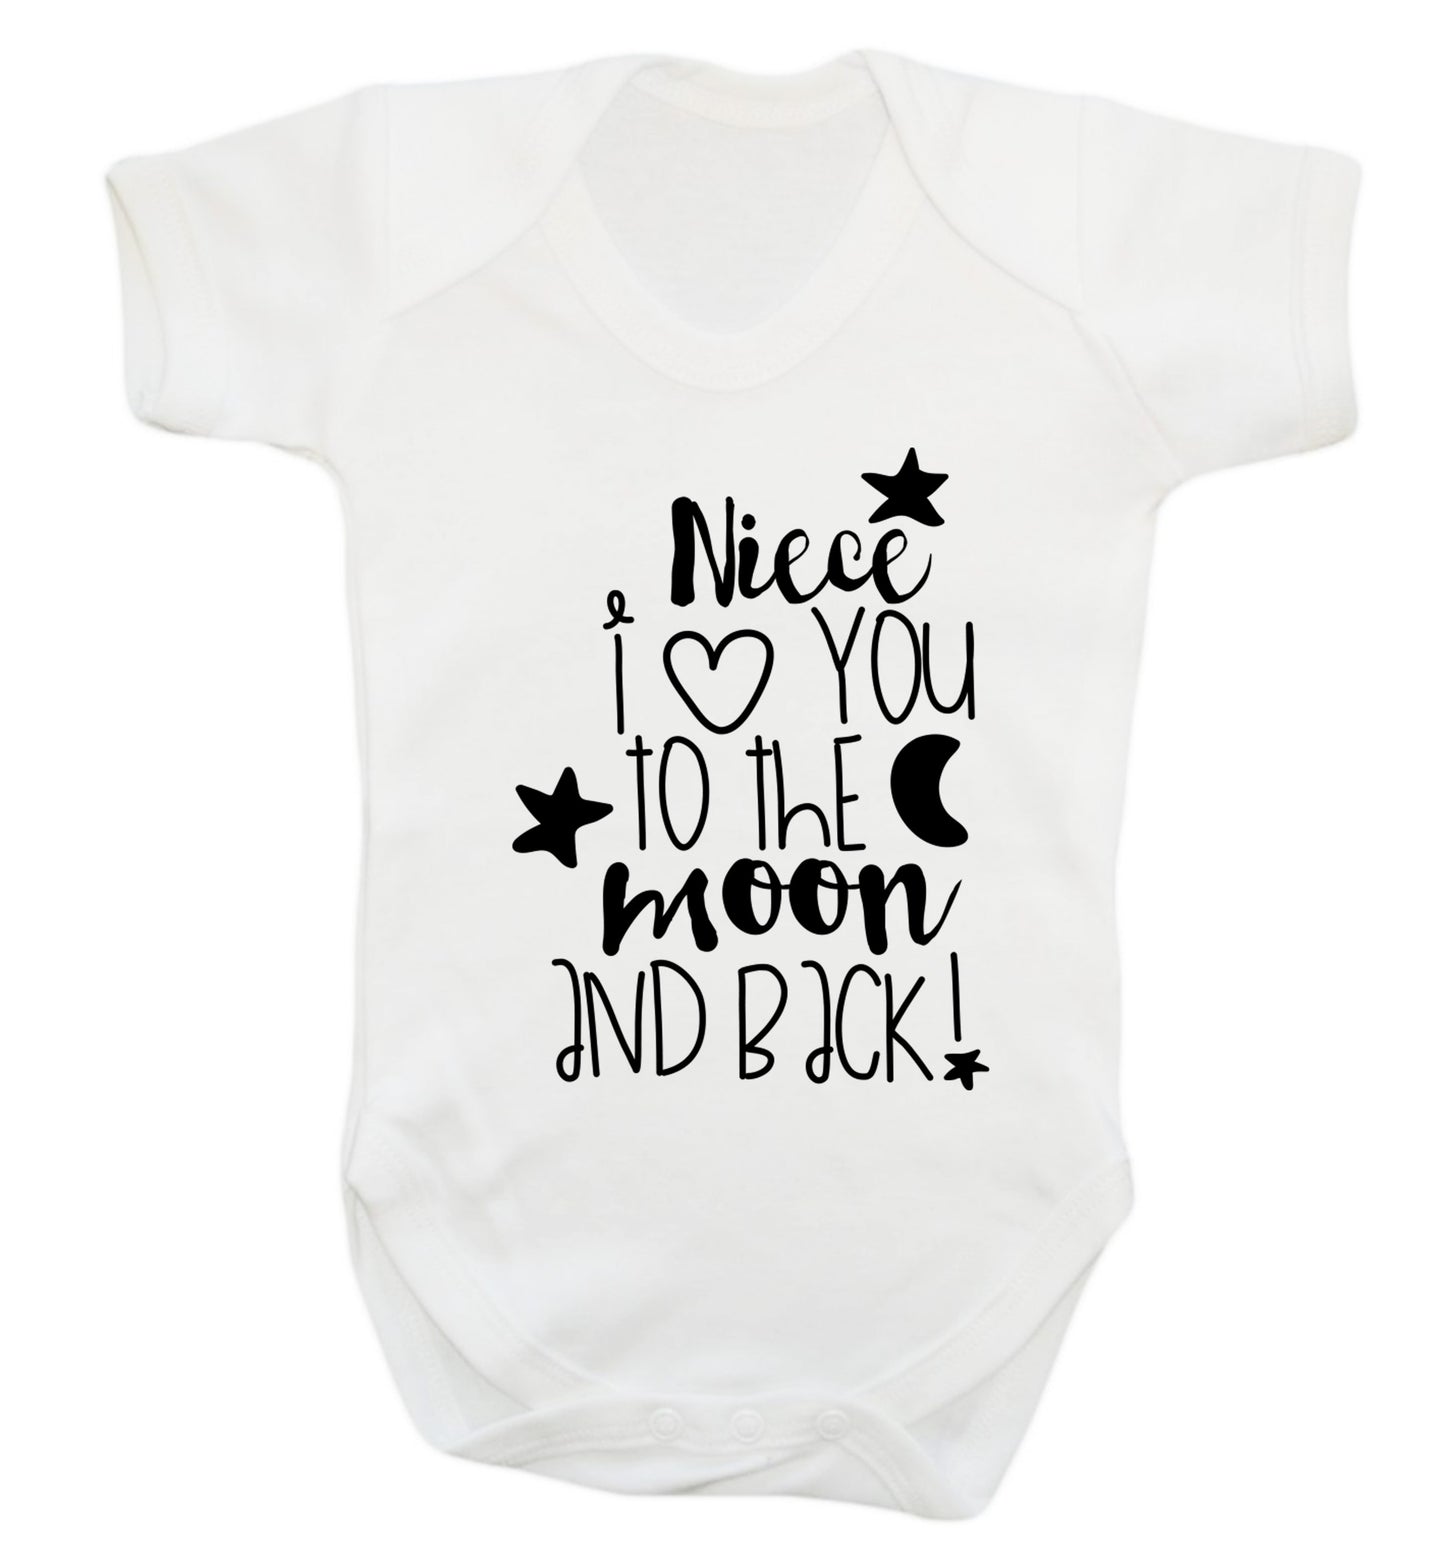 Niece I love you to the moon and back Baby Vest white 18-24 months